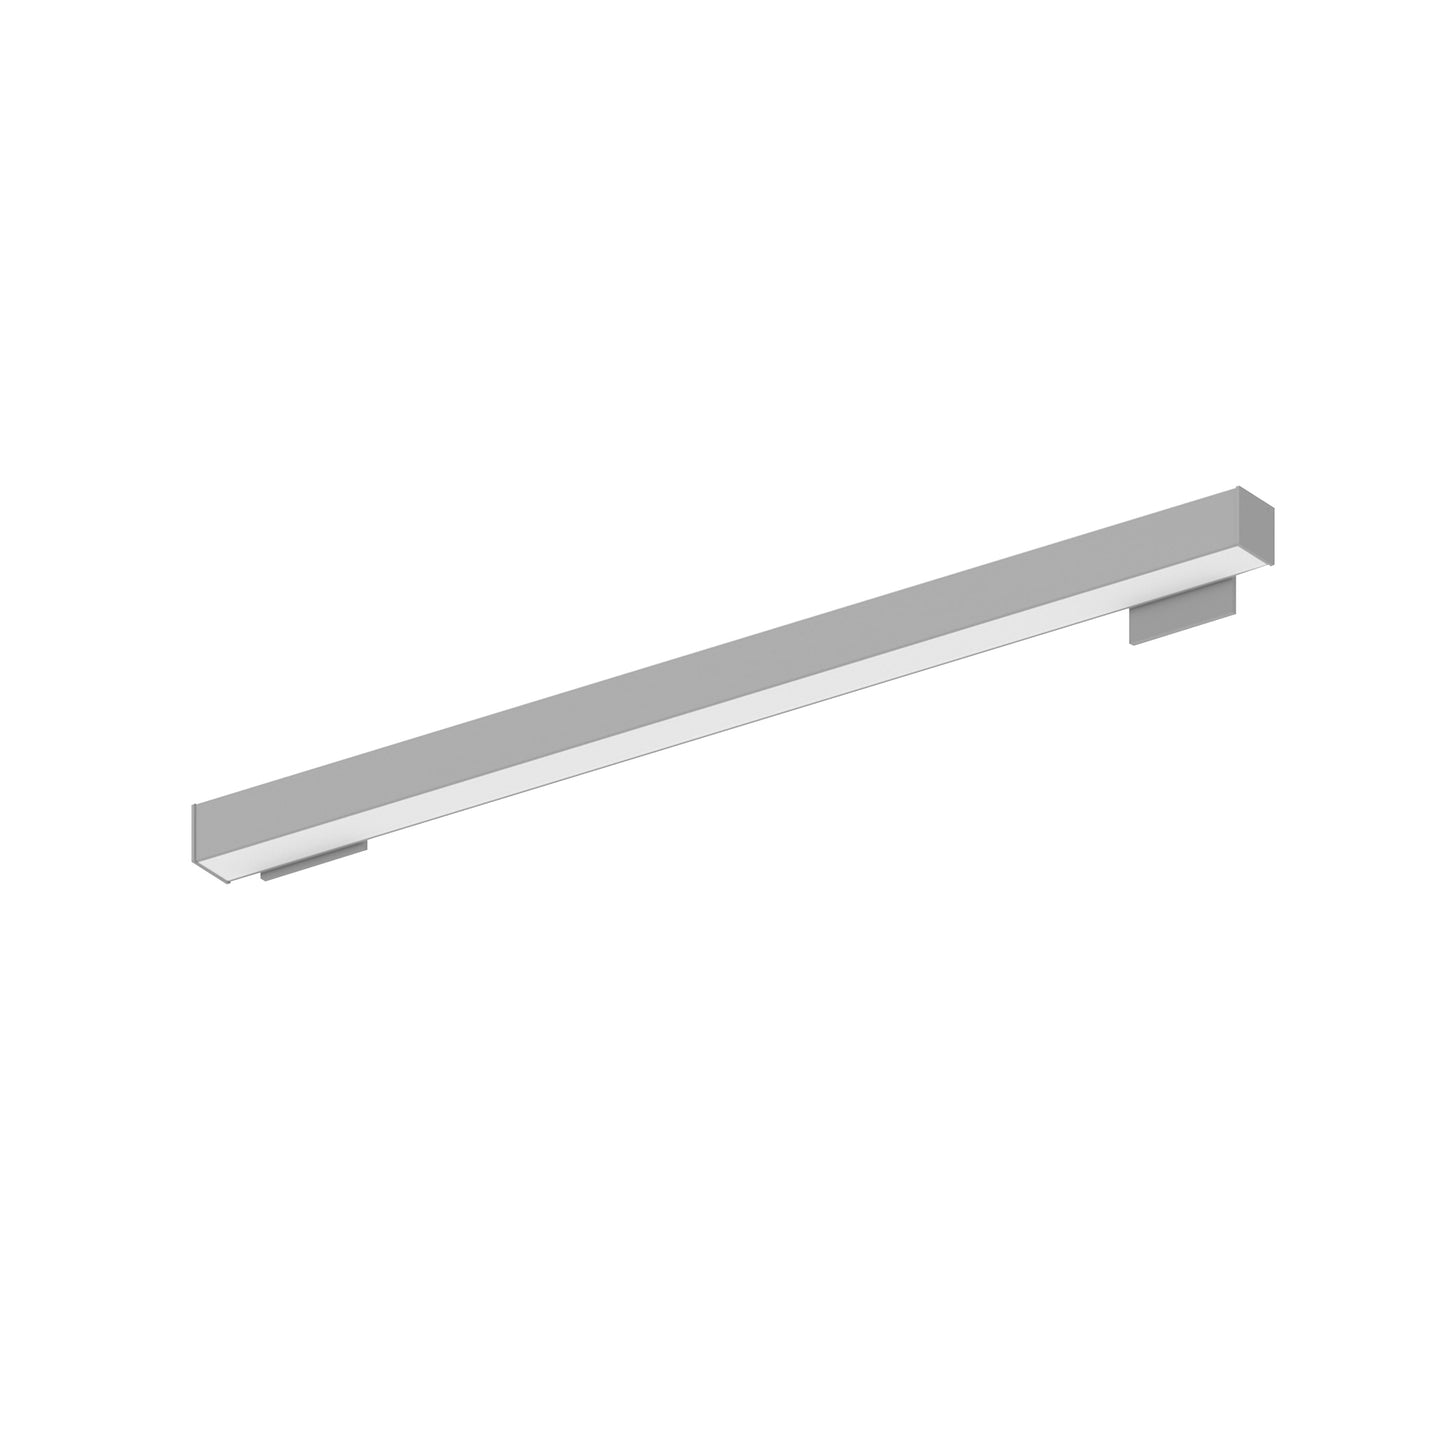 Nora Lighting 2' L-Line LED Wall Mount Linear, 2100lm / 4000K, 2"x4" Left Plate & 4"x4" Right Plate, Right Power Feed, Aluminum Finish   NWLIN-21040A/L2-R4P